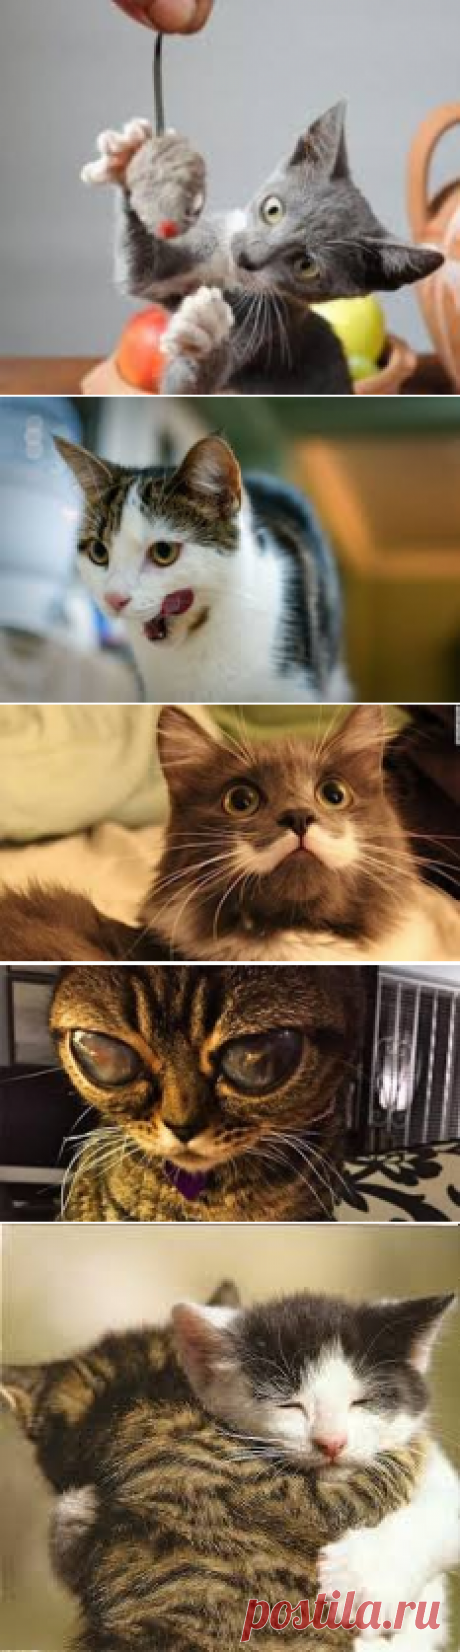 cats - Google Search